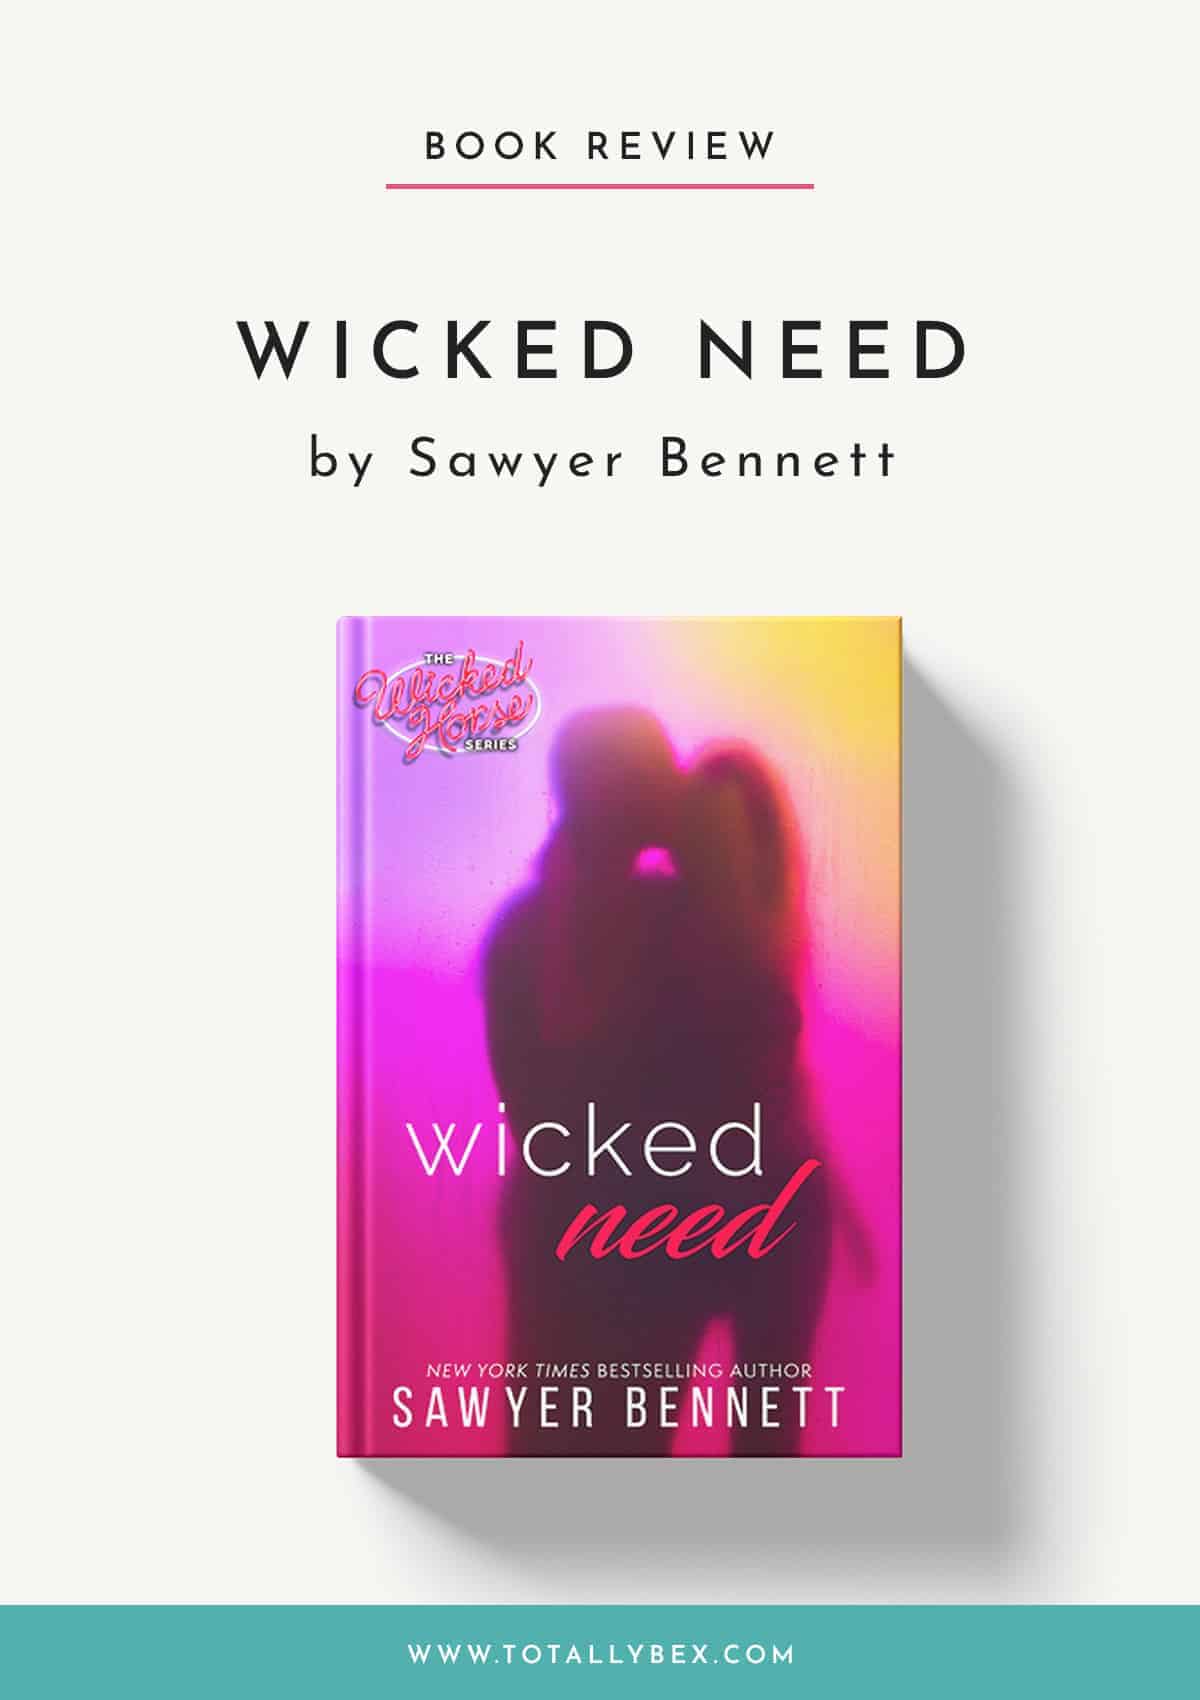 Wicked Need by Sawyer Bennett-Book Review